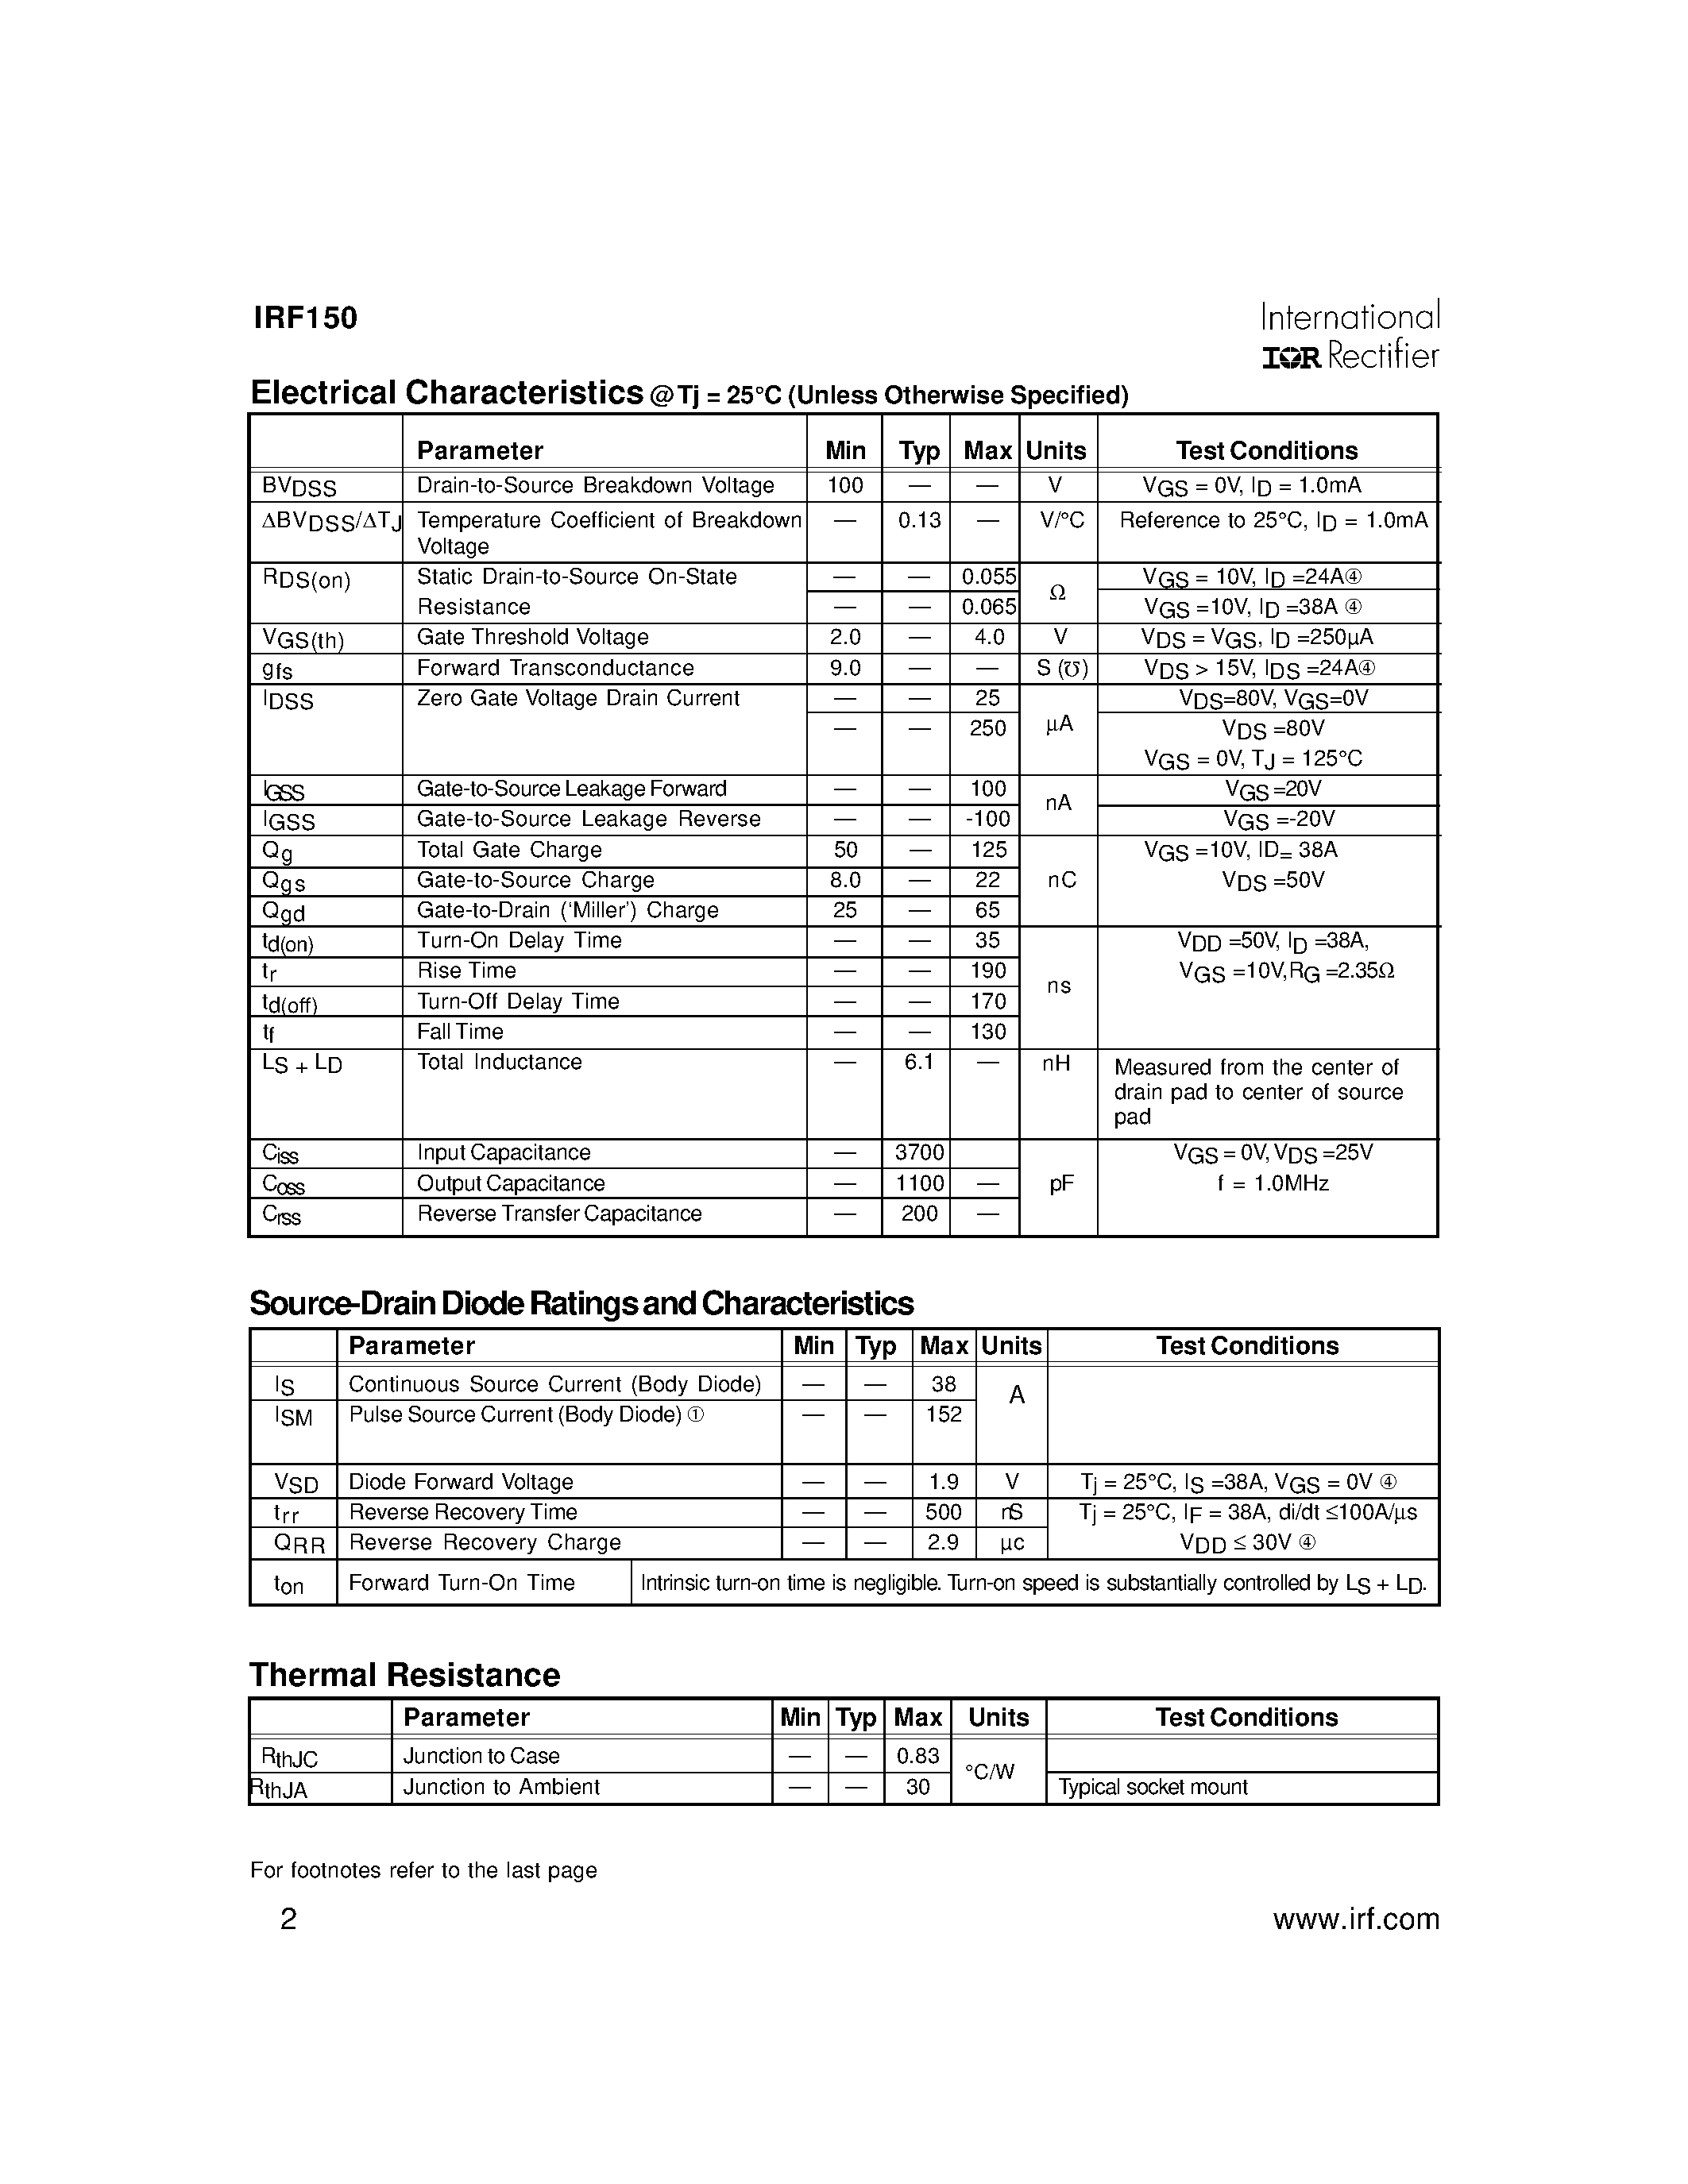 Datasheet IRF150 - TRANSISTORS N-CHANNEL(Vdss=100V/ Rds(on)=0.055ohm/ Id= 38A) page 2